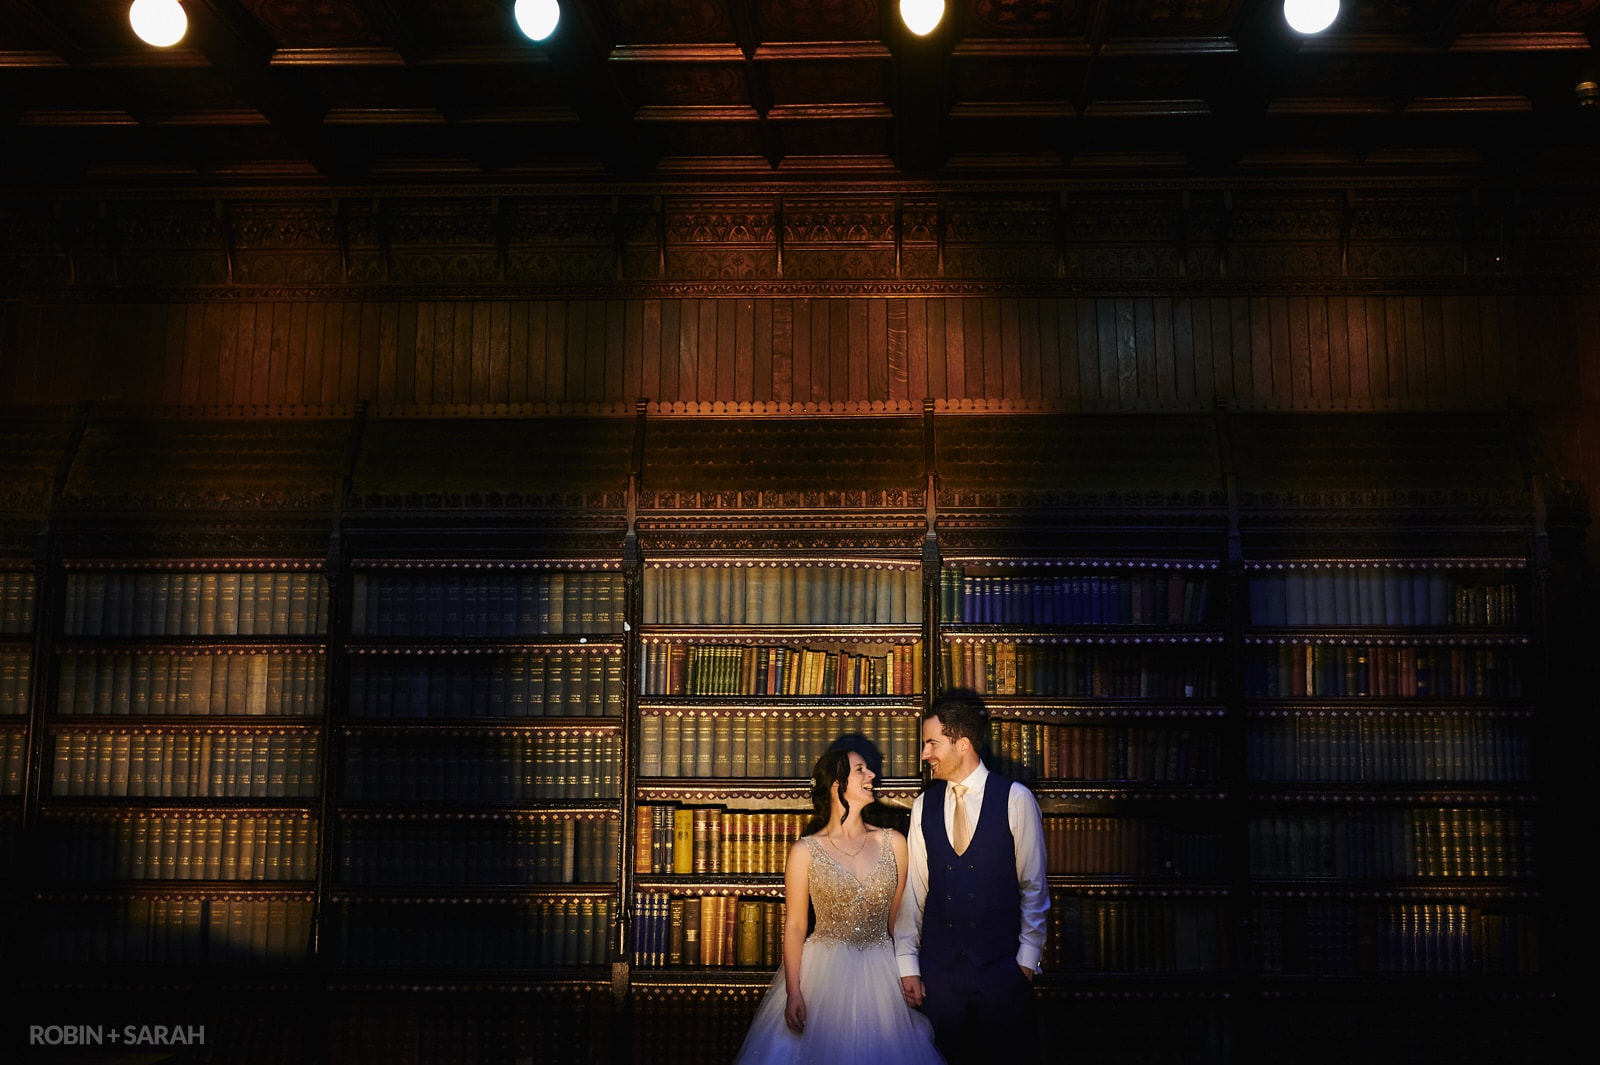 Bride and groom in library room at night, with eerie lighting